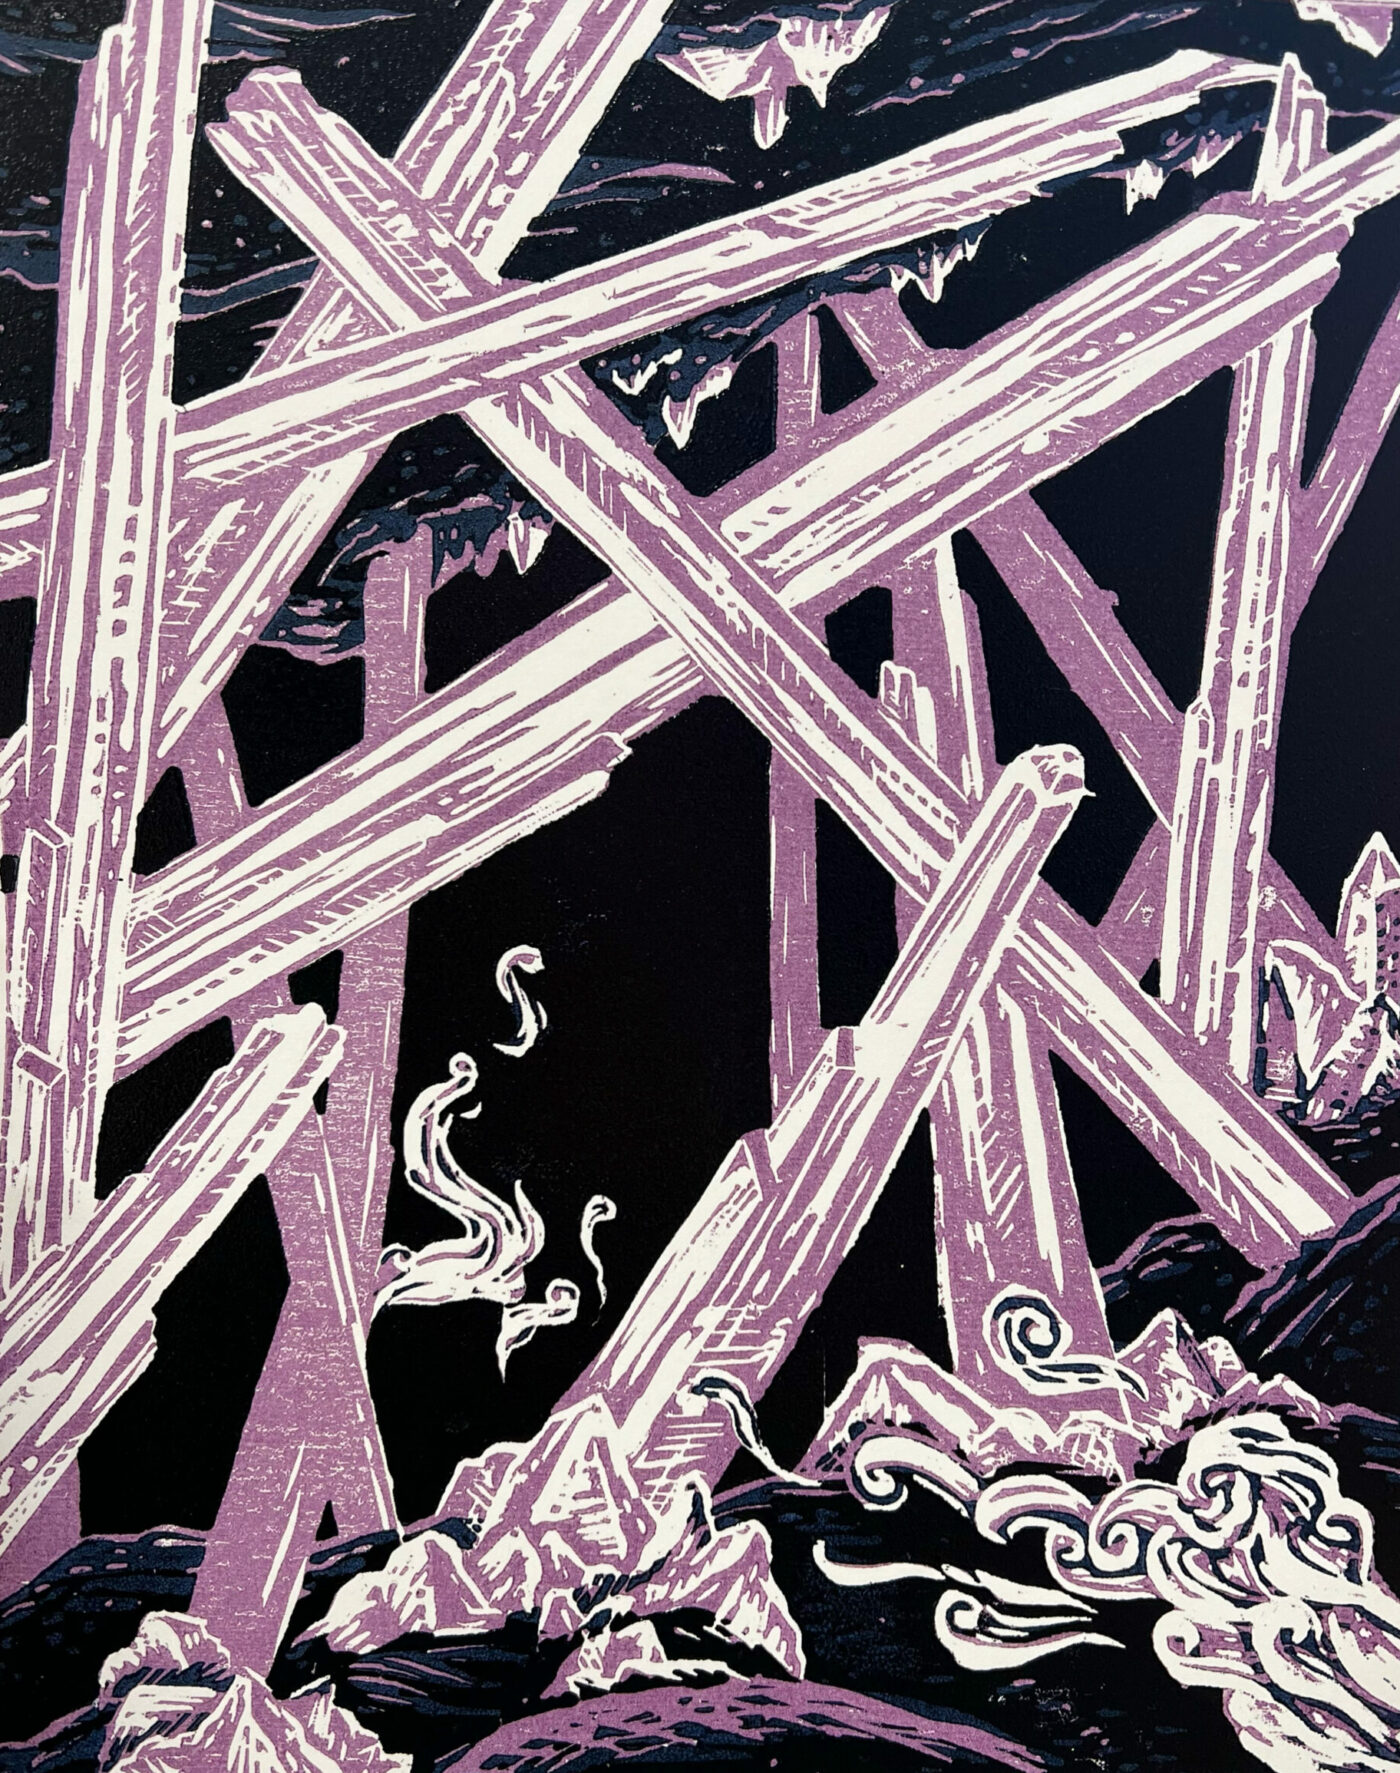 A woodcut depicting a collection of stalagmites and stalactites in a dark cave, printed in lavender.